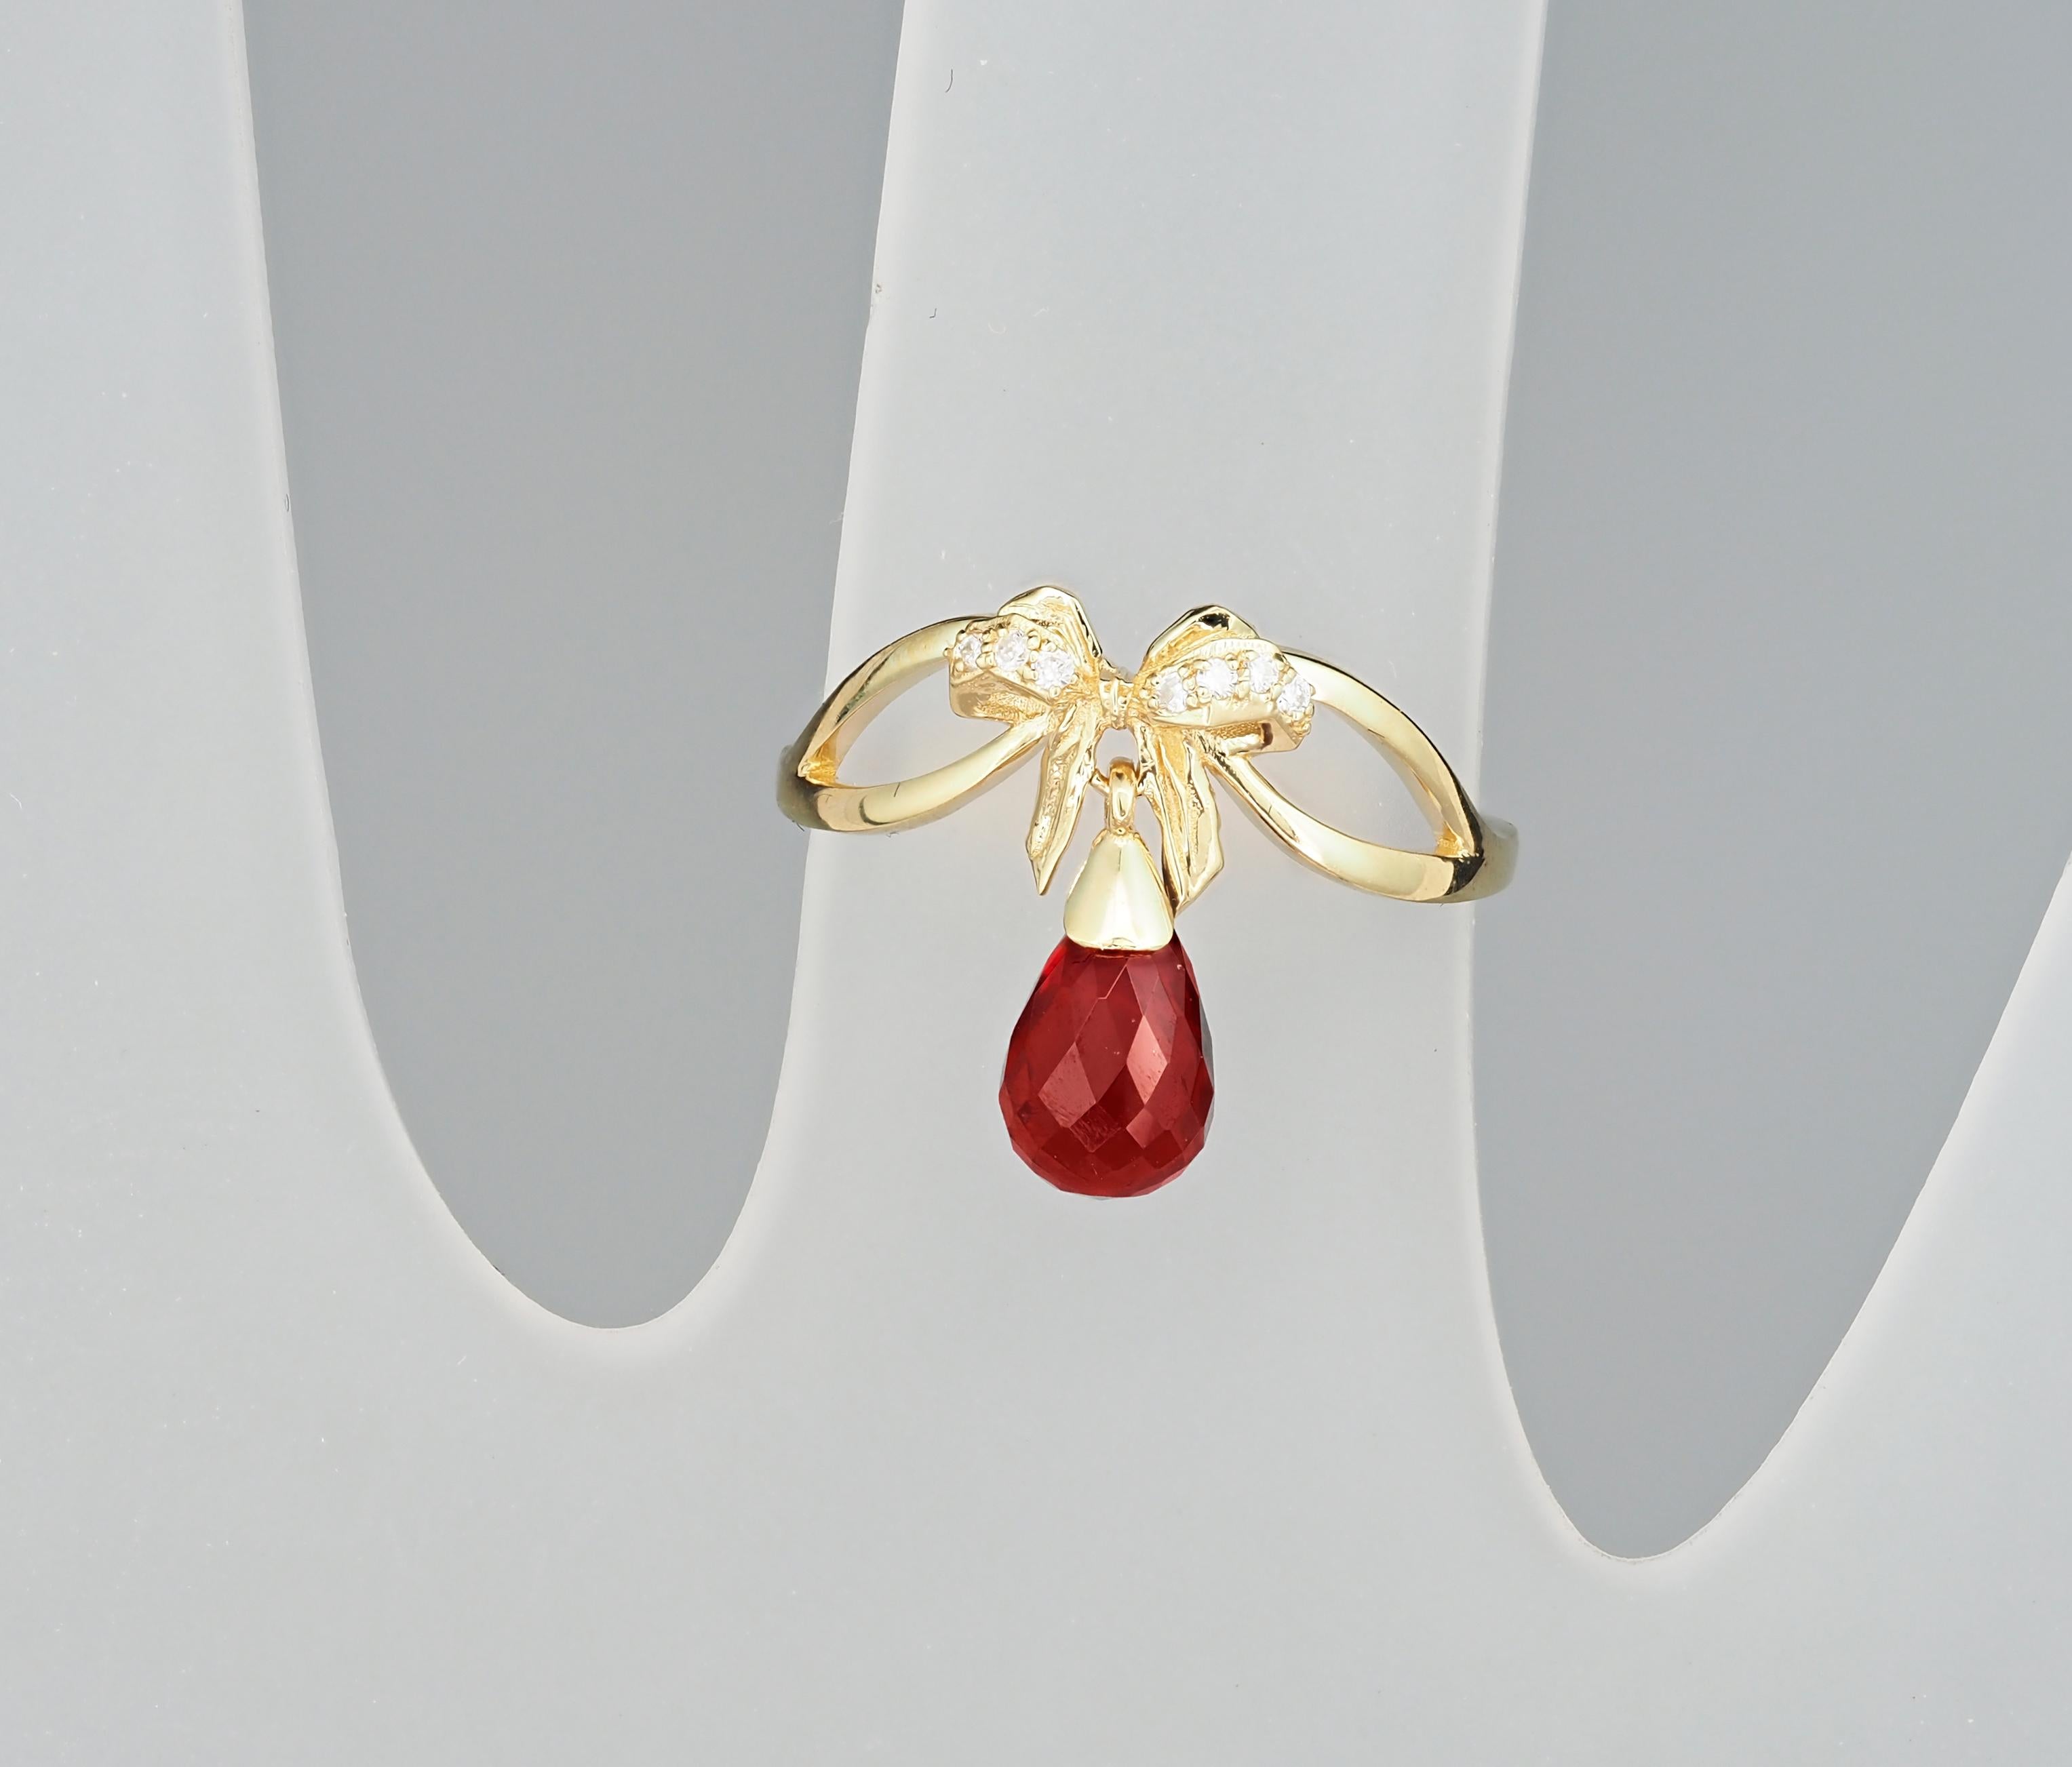 Garnet Briolette 14k Gold Ring. 
Gold Ribbon Ring. Red Ribbon Ring. January Birthstone Ring. Garnet cocktail ring. Statement garnet ring.

Metal: 14k gold
Weight: 2.04 g. depends from size.

Central stone: natural garnet 1 piece
Cut: